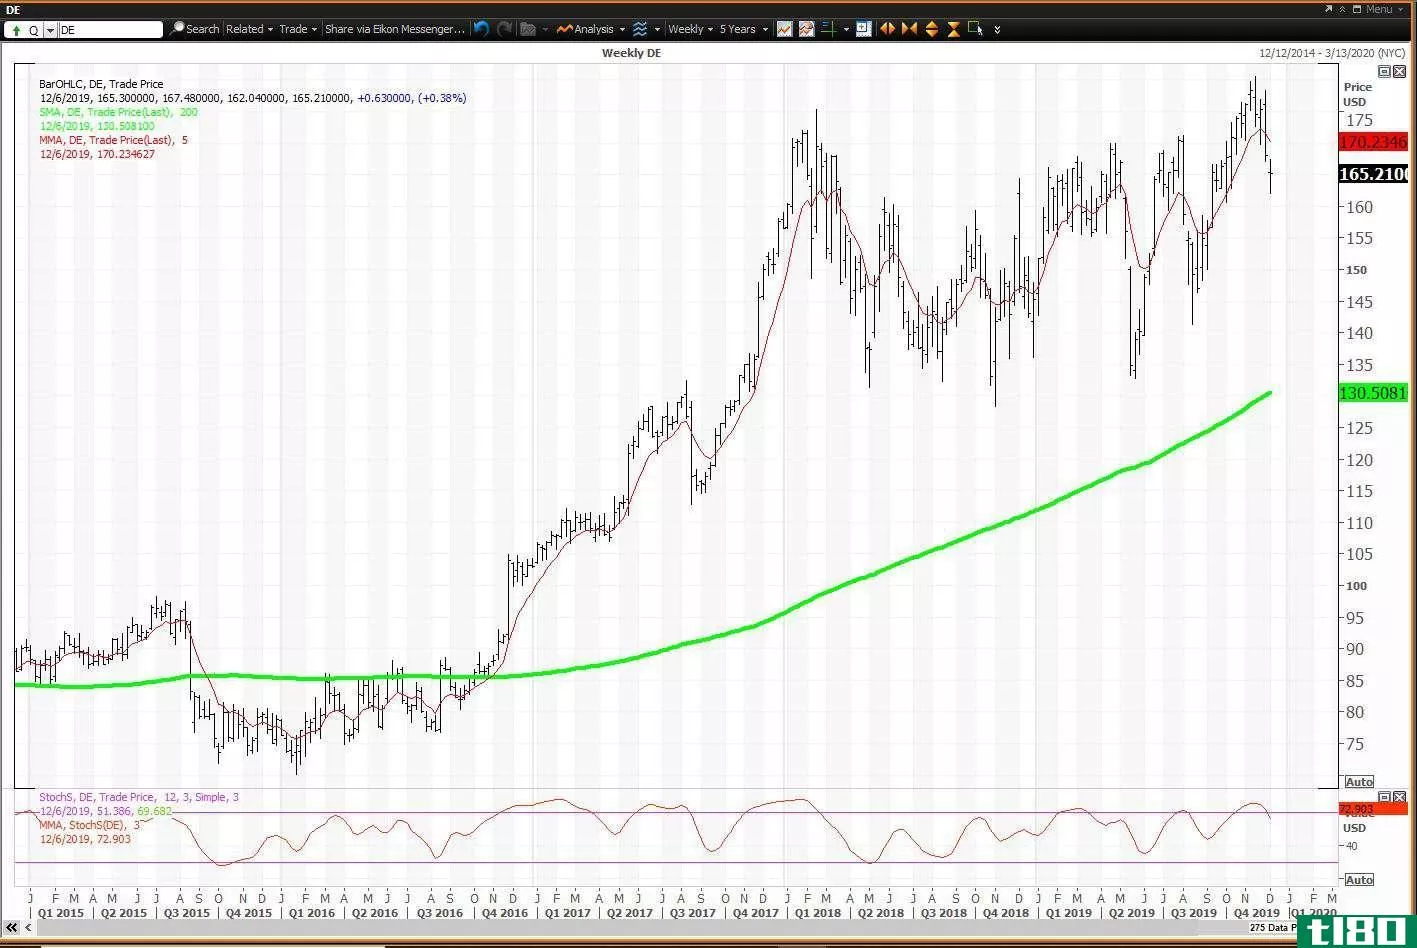 Weekly chart showing the share price performance of Deere & Company (DE)